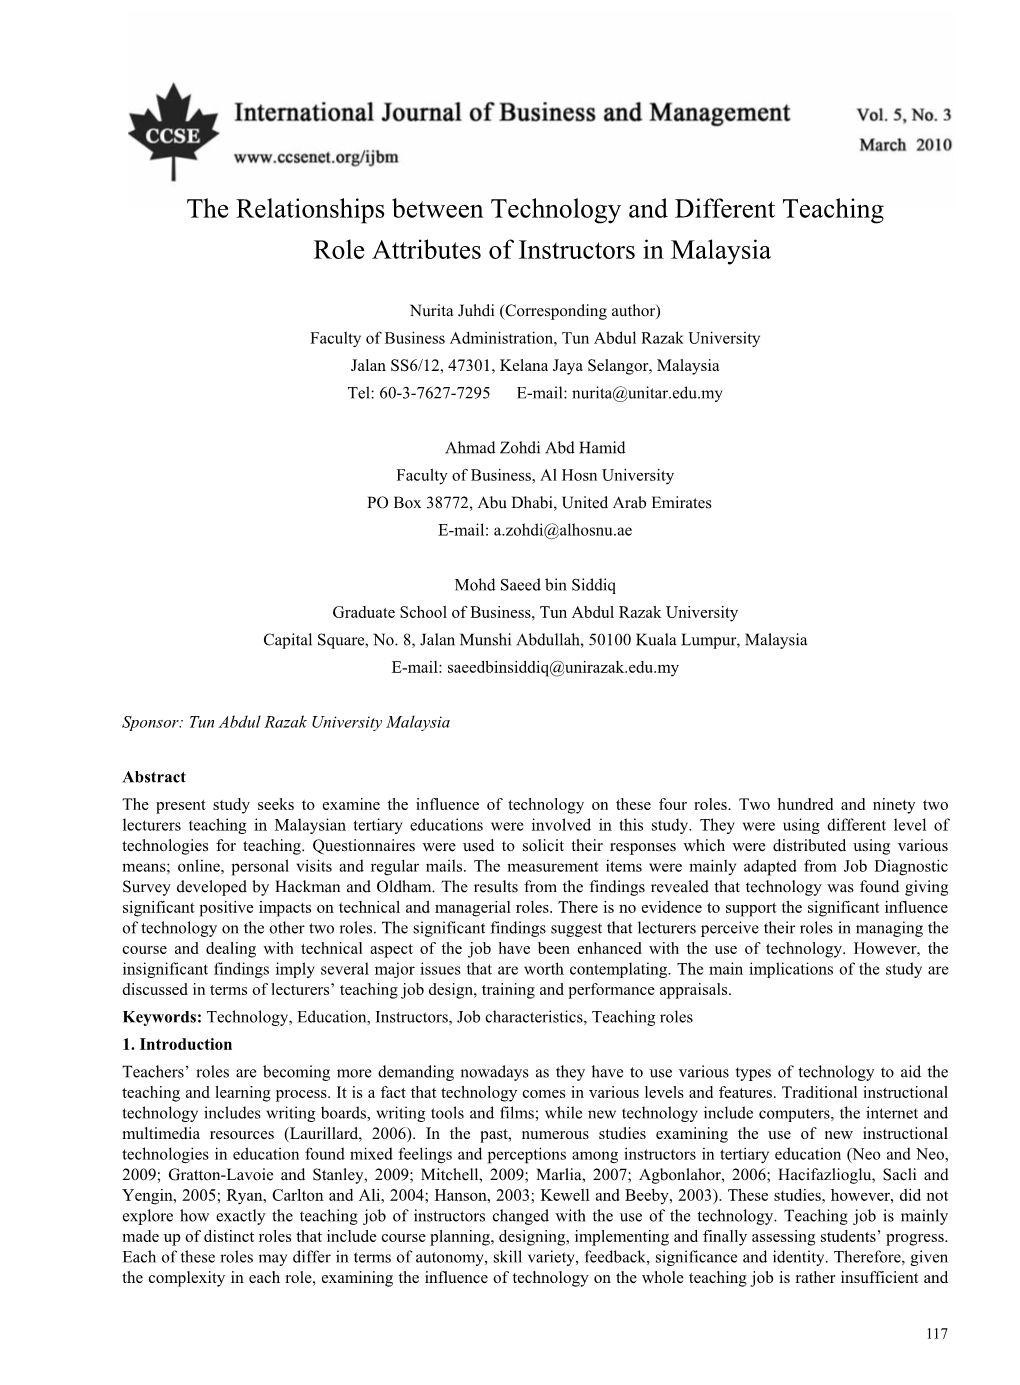 The Relationships Between Technology and Different Teaching Role Attributes of Instructors in Malaysia